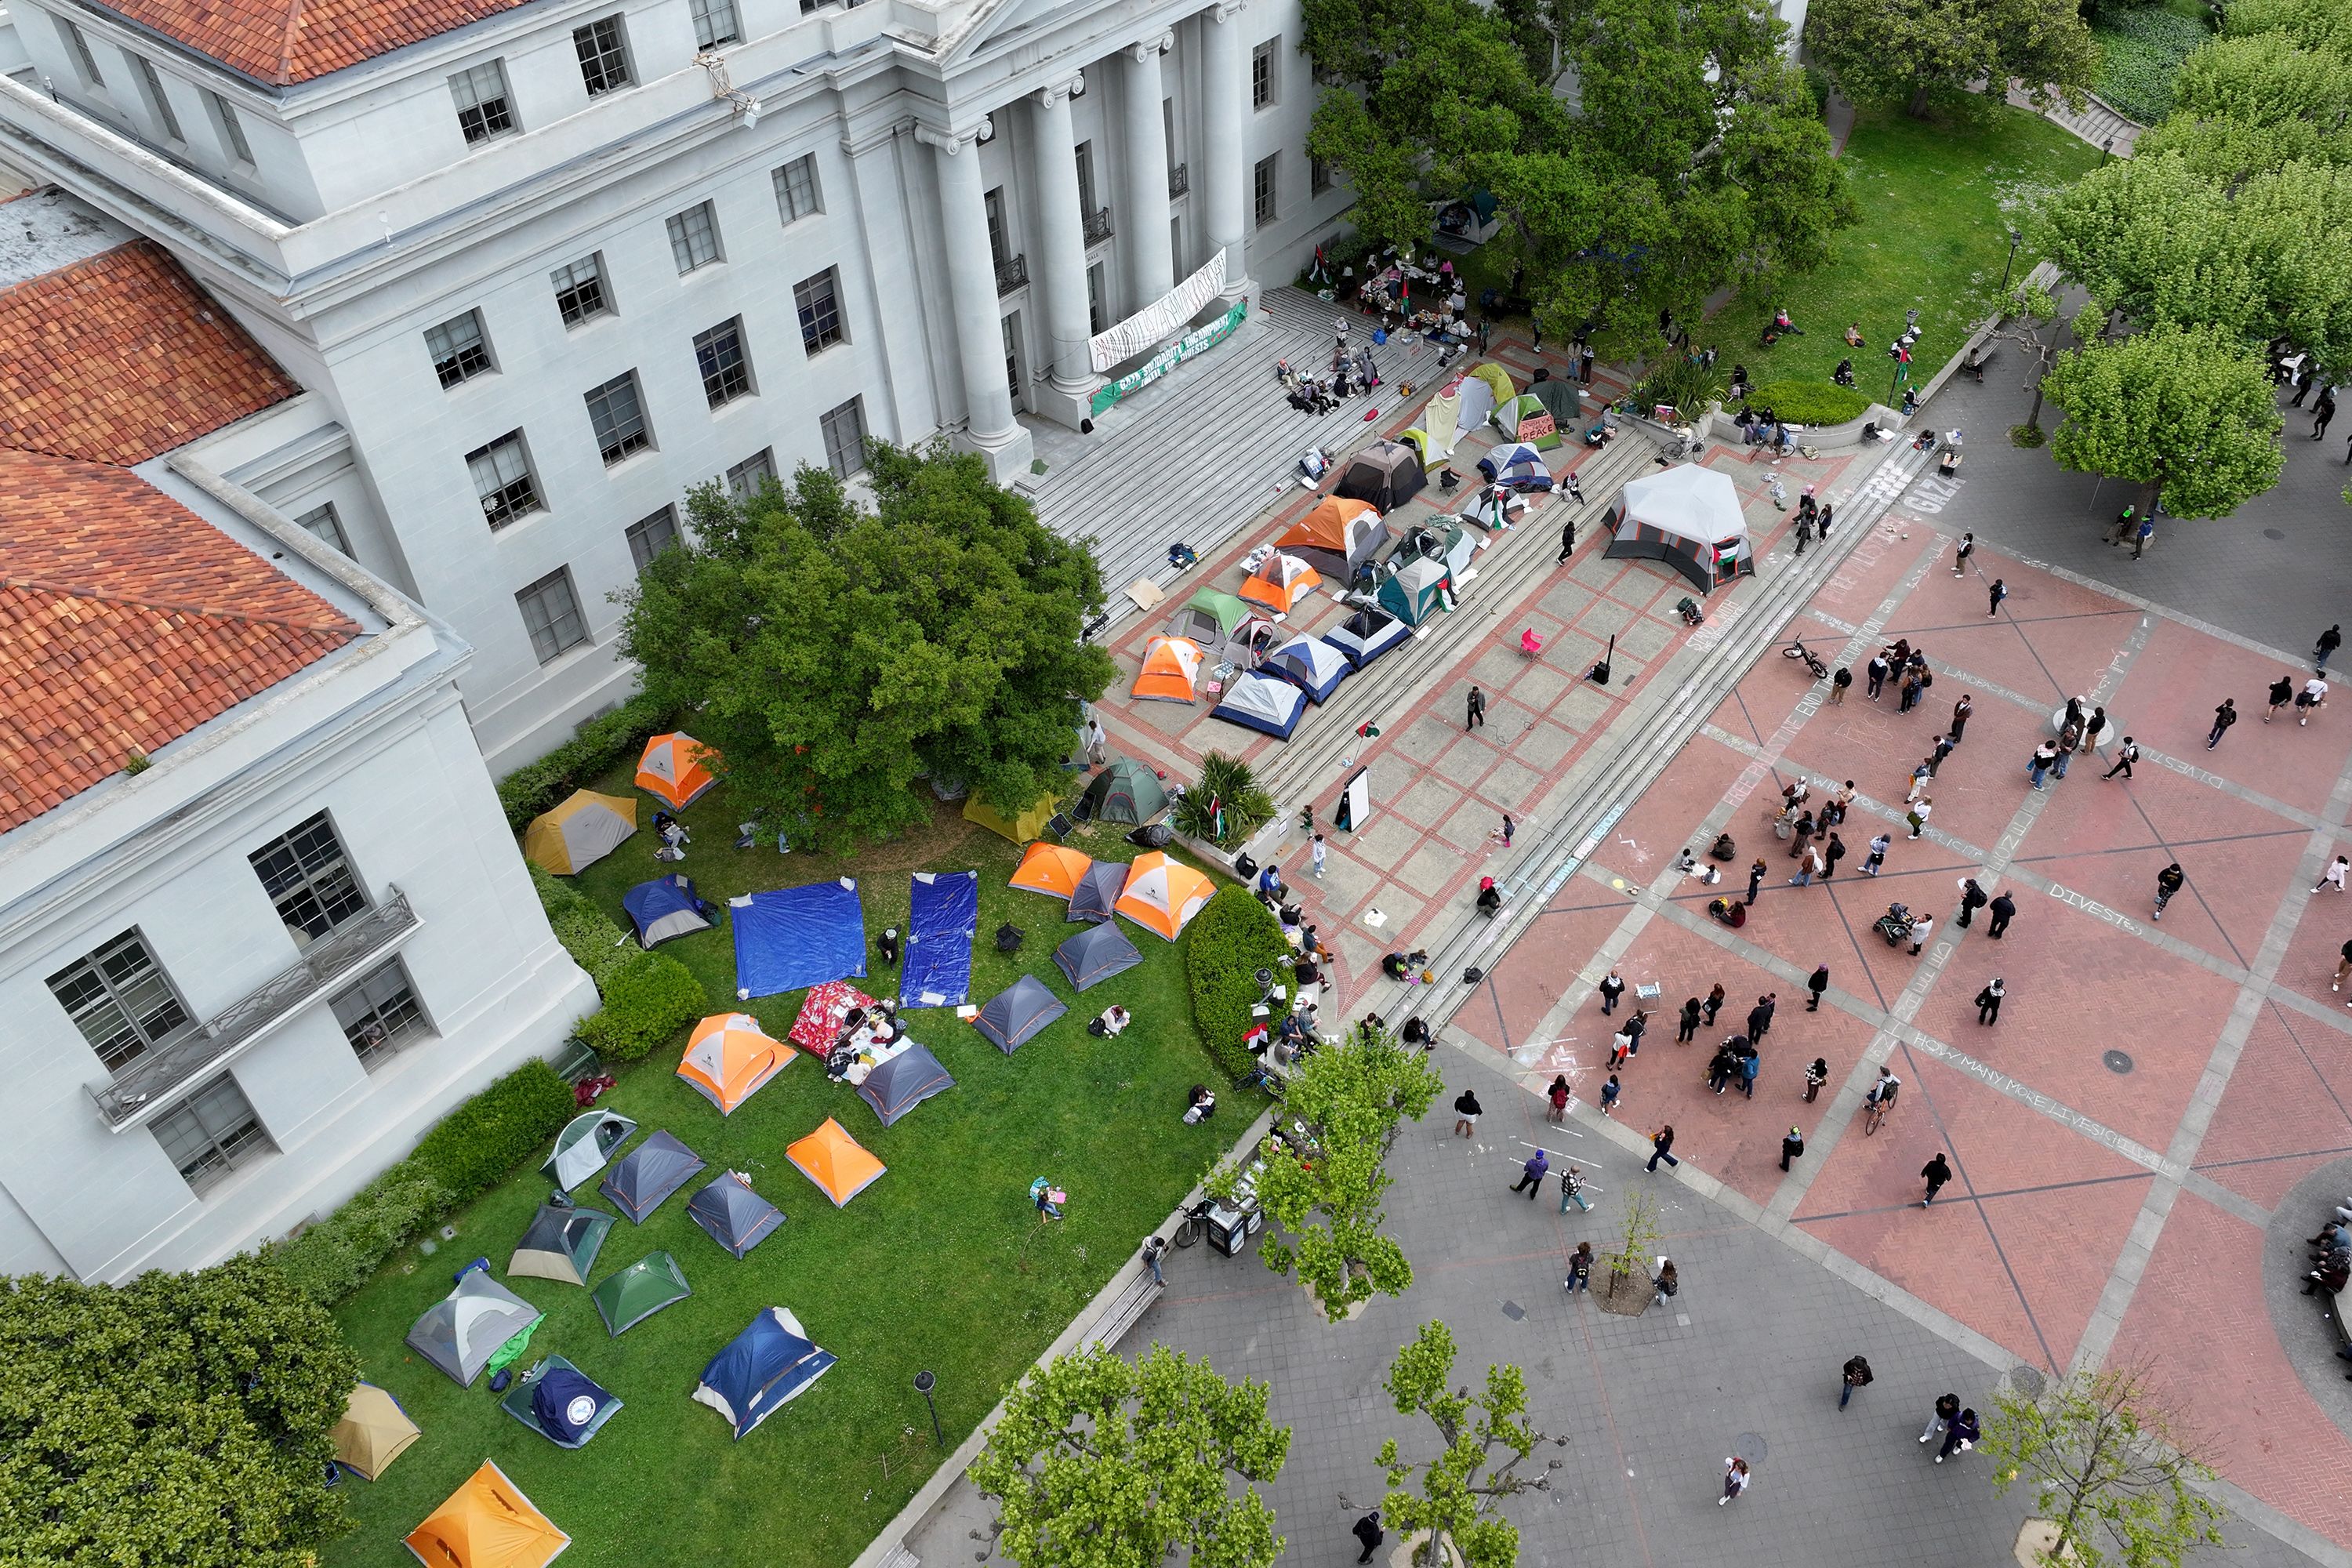 Students at the University of California, Berkeley, set up an encampment at Sproul Hall on April 23.